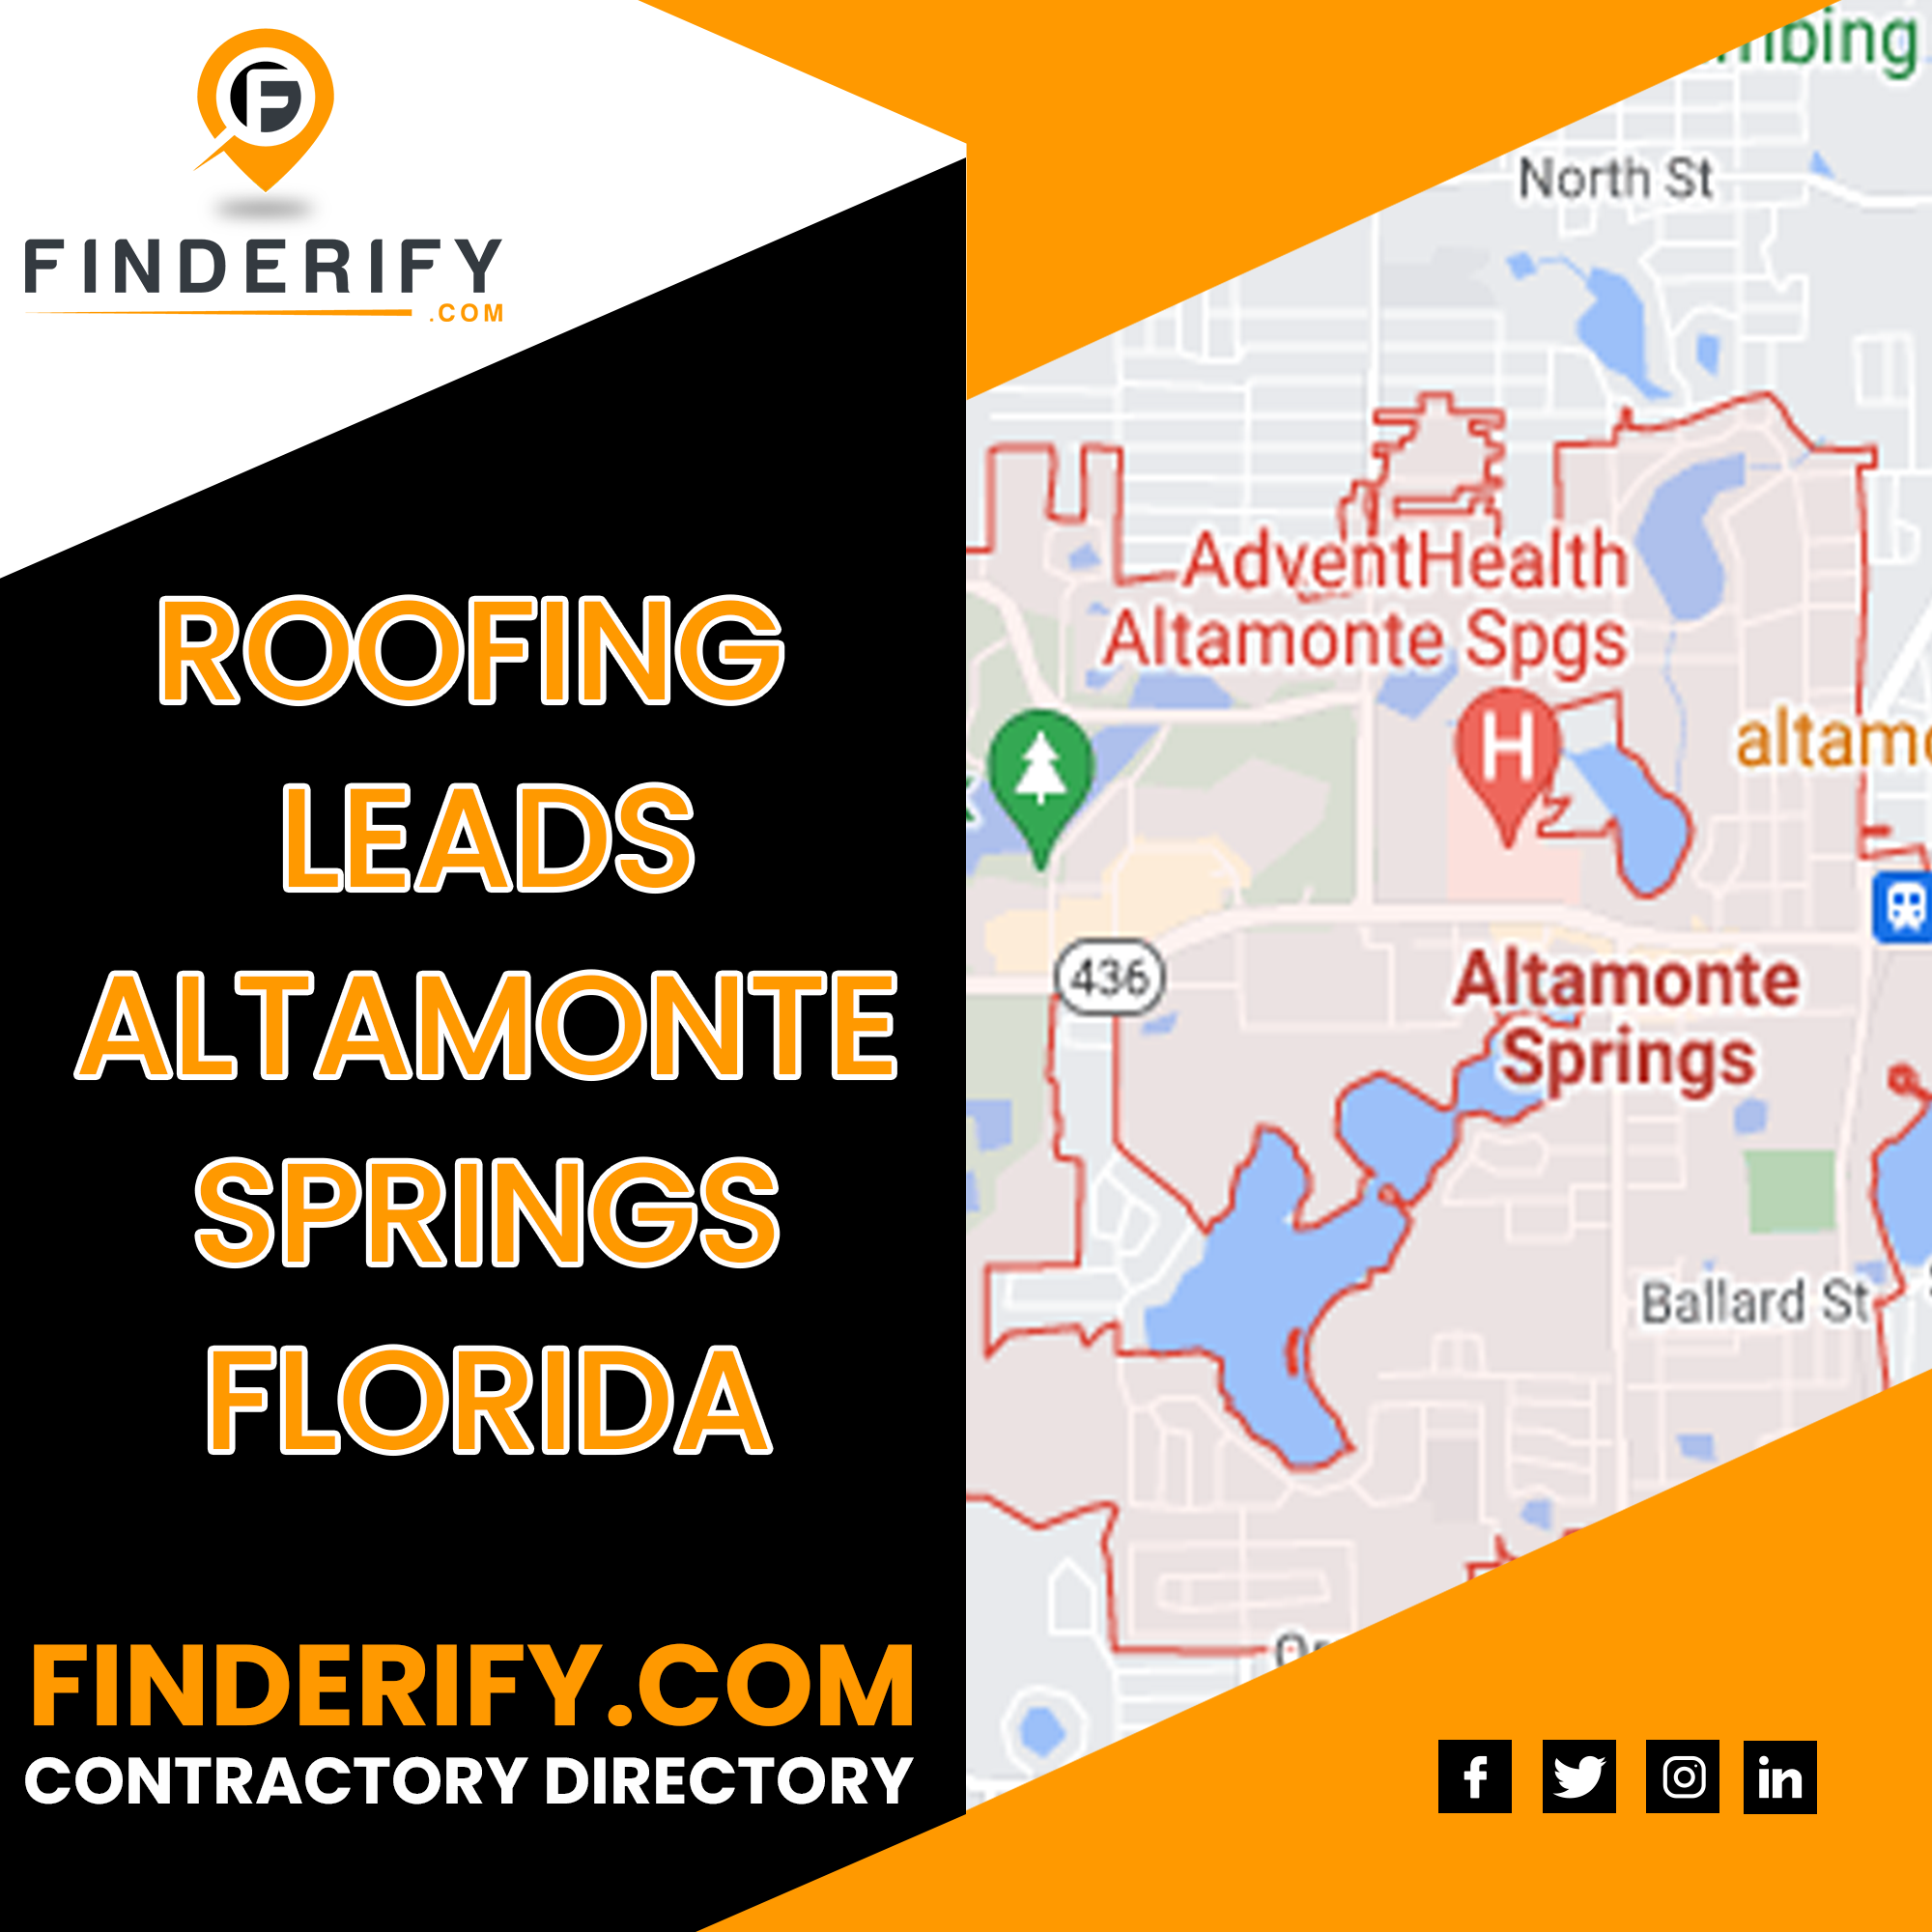 Home service directory for roofing leads in Altamonte Springs, Florida on Finderify.com